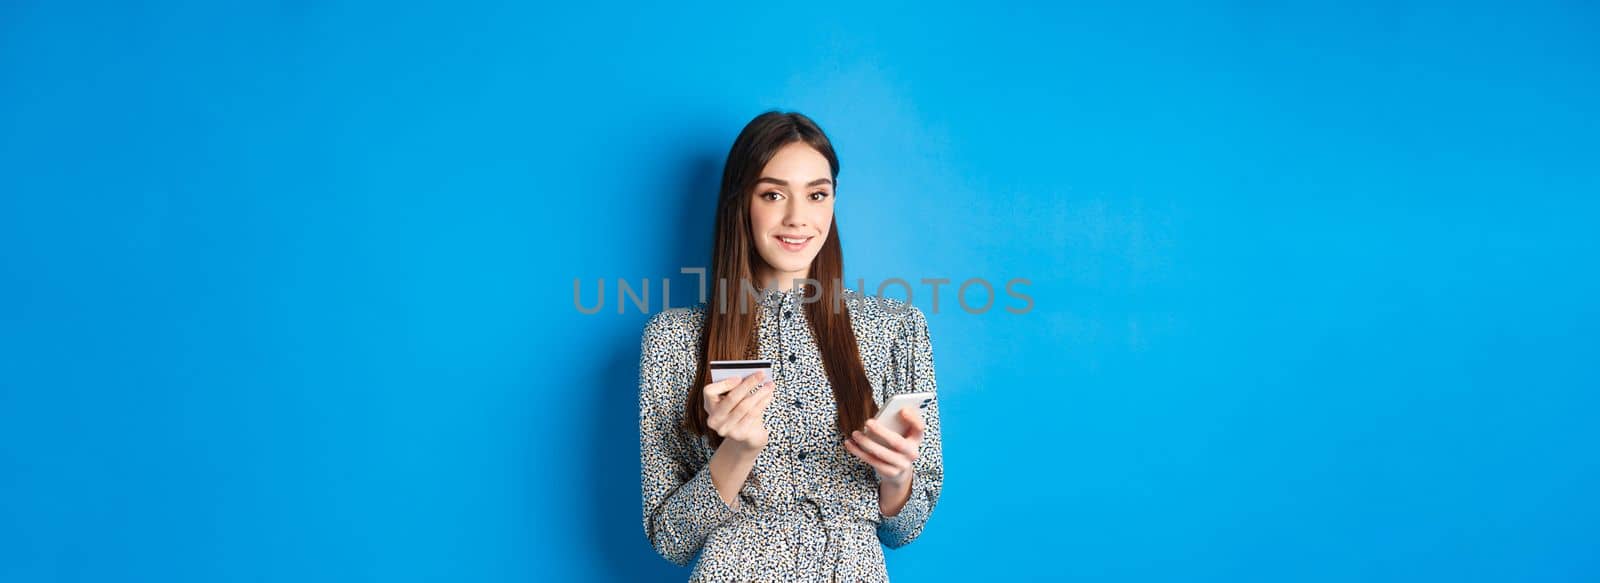 Online shopping. Happy smiling woman buying in app, holding smartphone and plastic credit card, blue background.